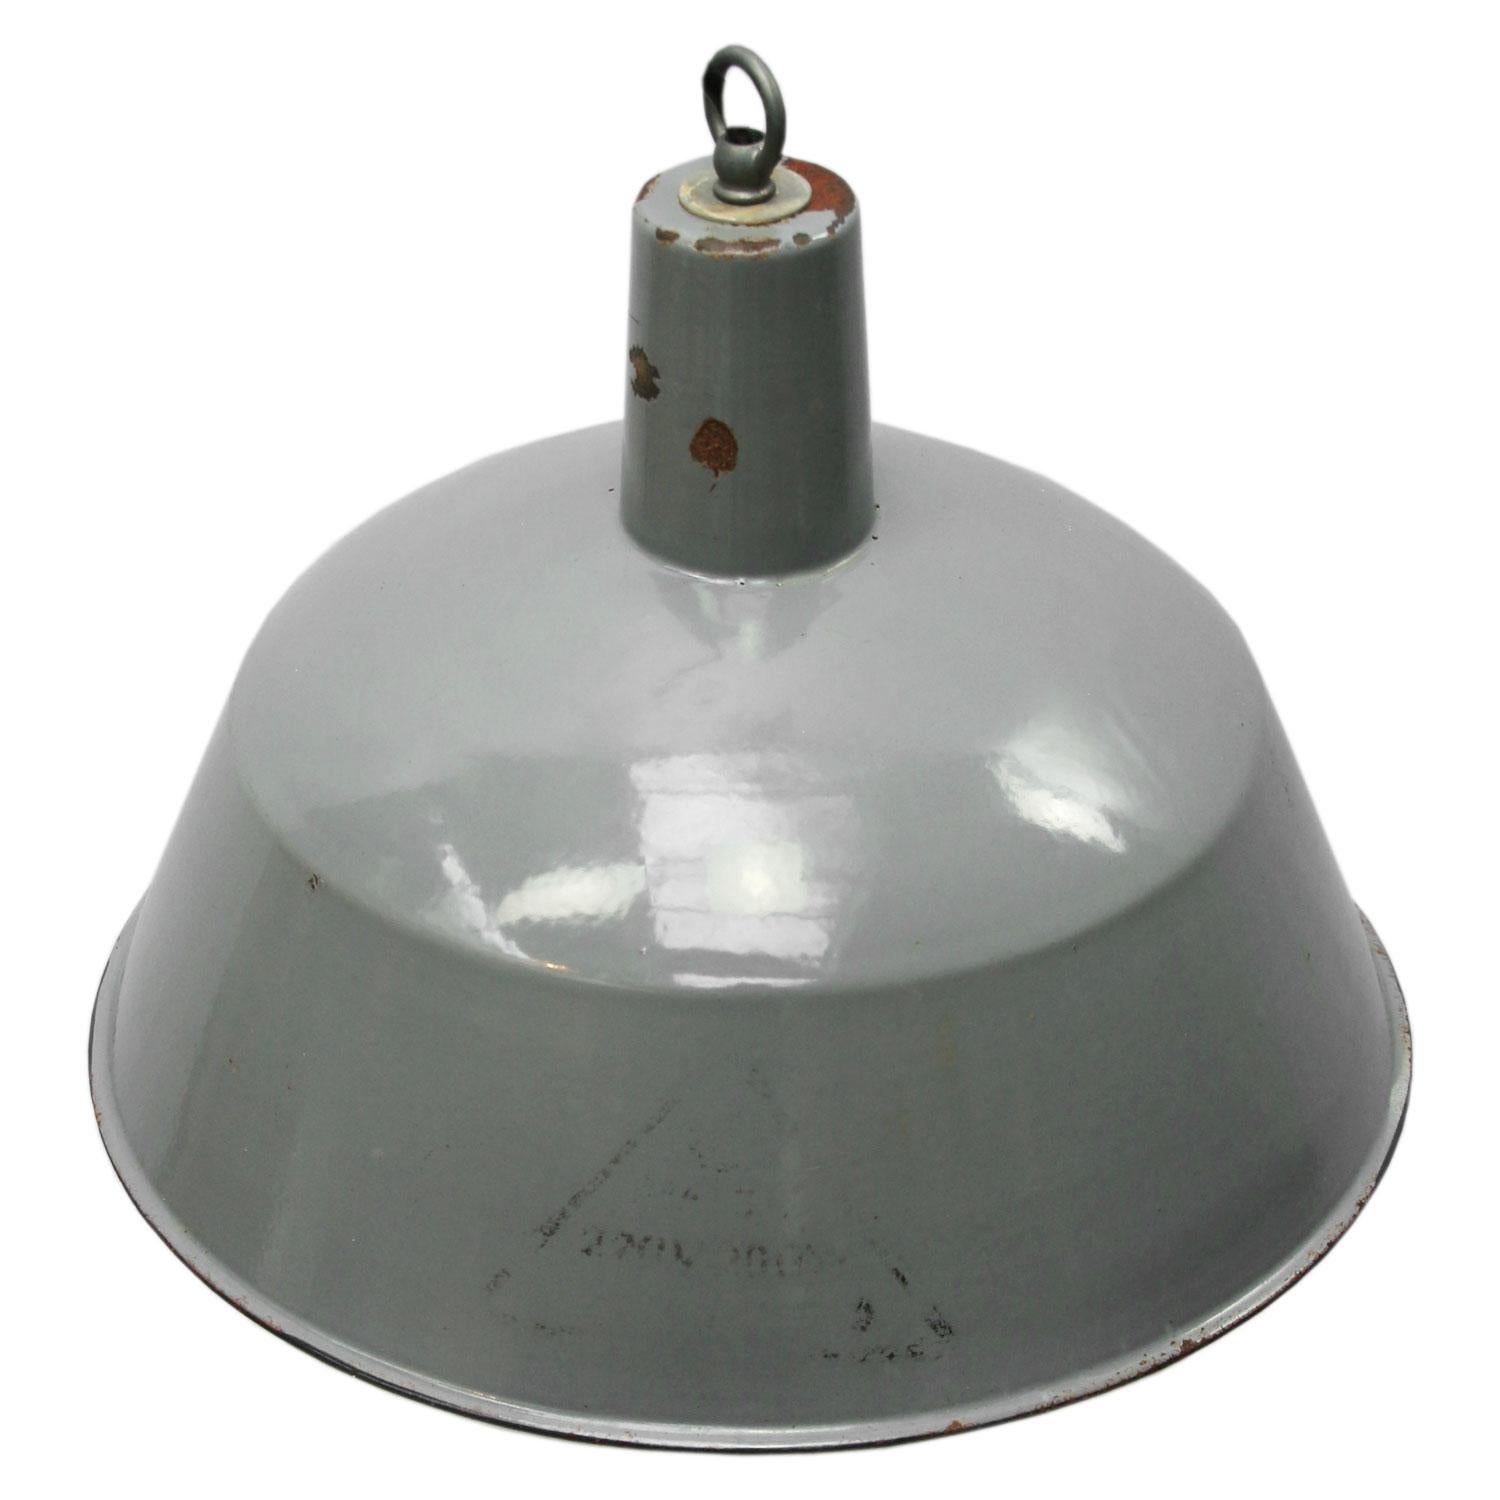 Factory hanging lamp
grey enamel with white type, white interior

Weight: 2.00 kg / 4.4 lb

Priced per individual item. All lamps have been made suitable by international standards for incandescent light bulbs, energy-efficient and LED bulbs